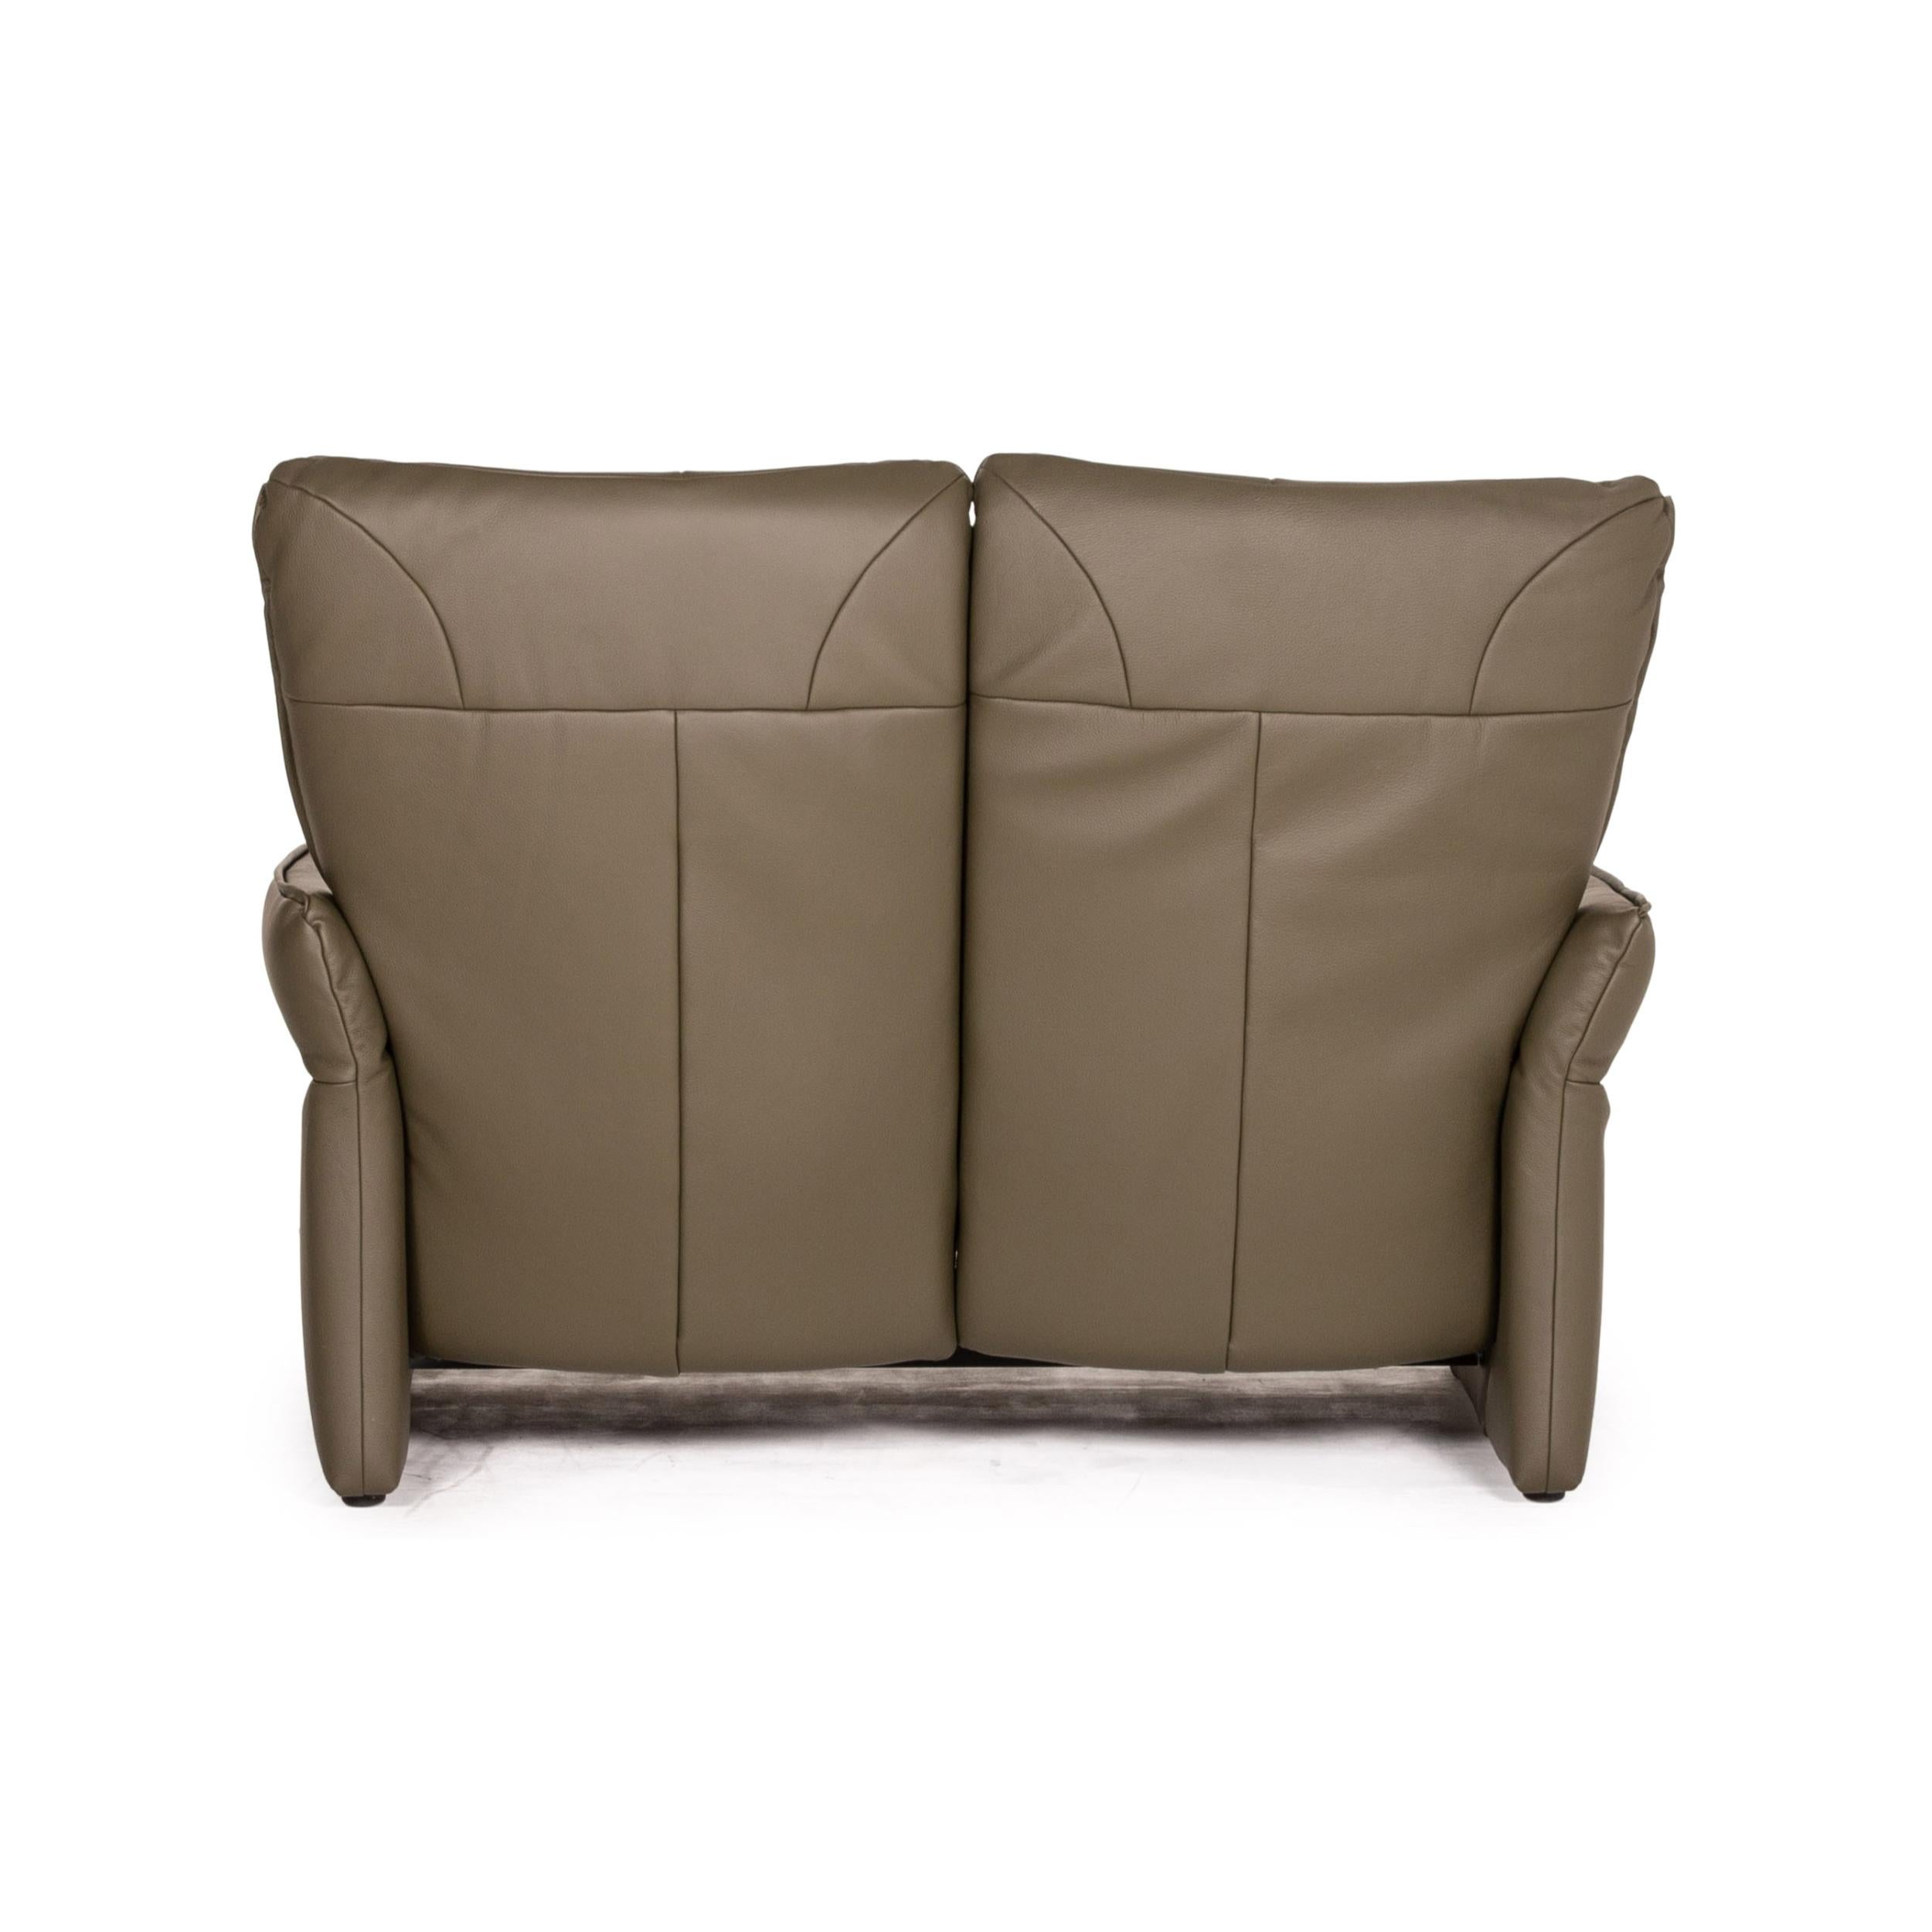 Himolla Cumuly Leather Sofa Olive Green Gray Green Two-Seater Function Relax 1